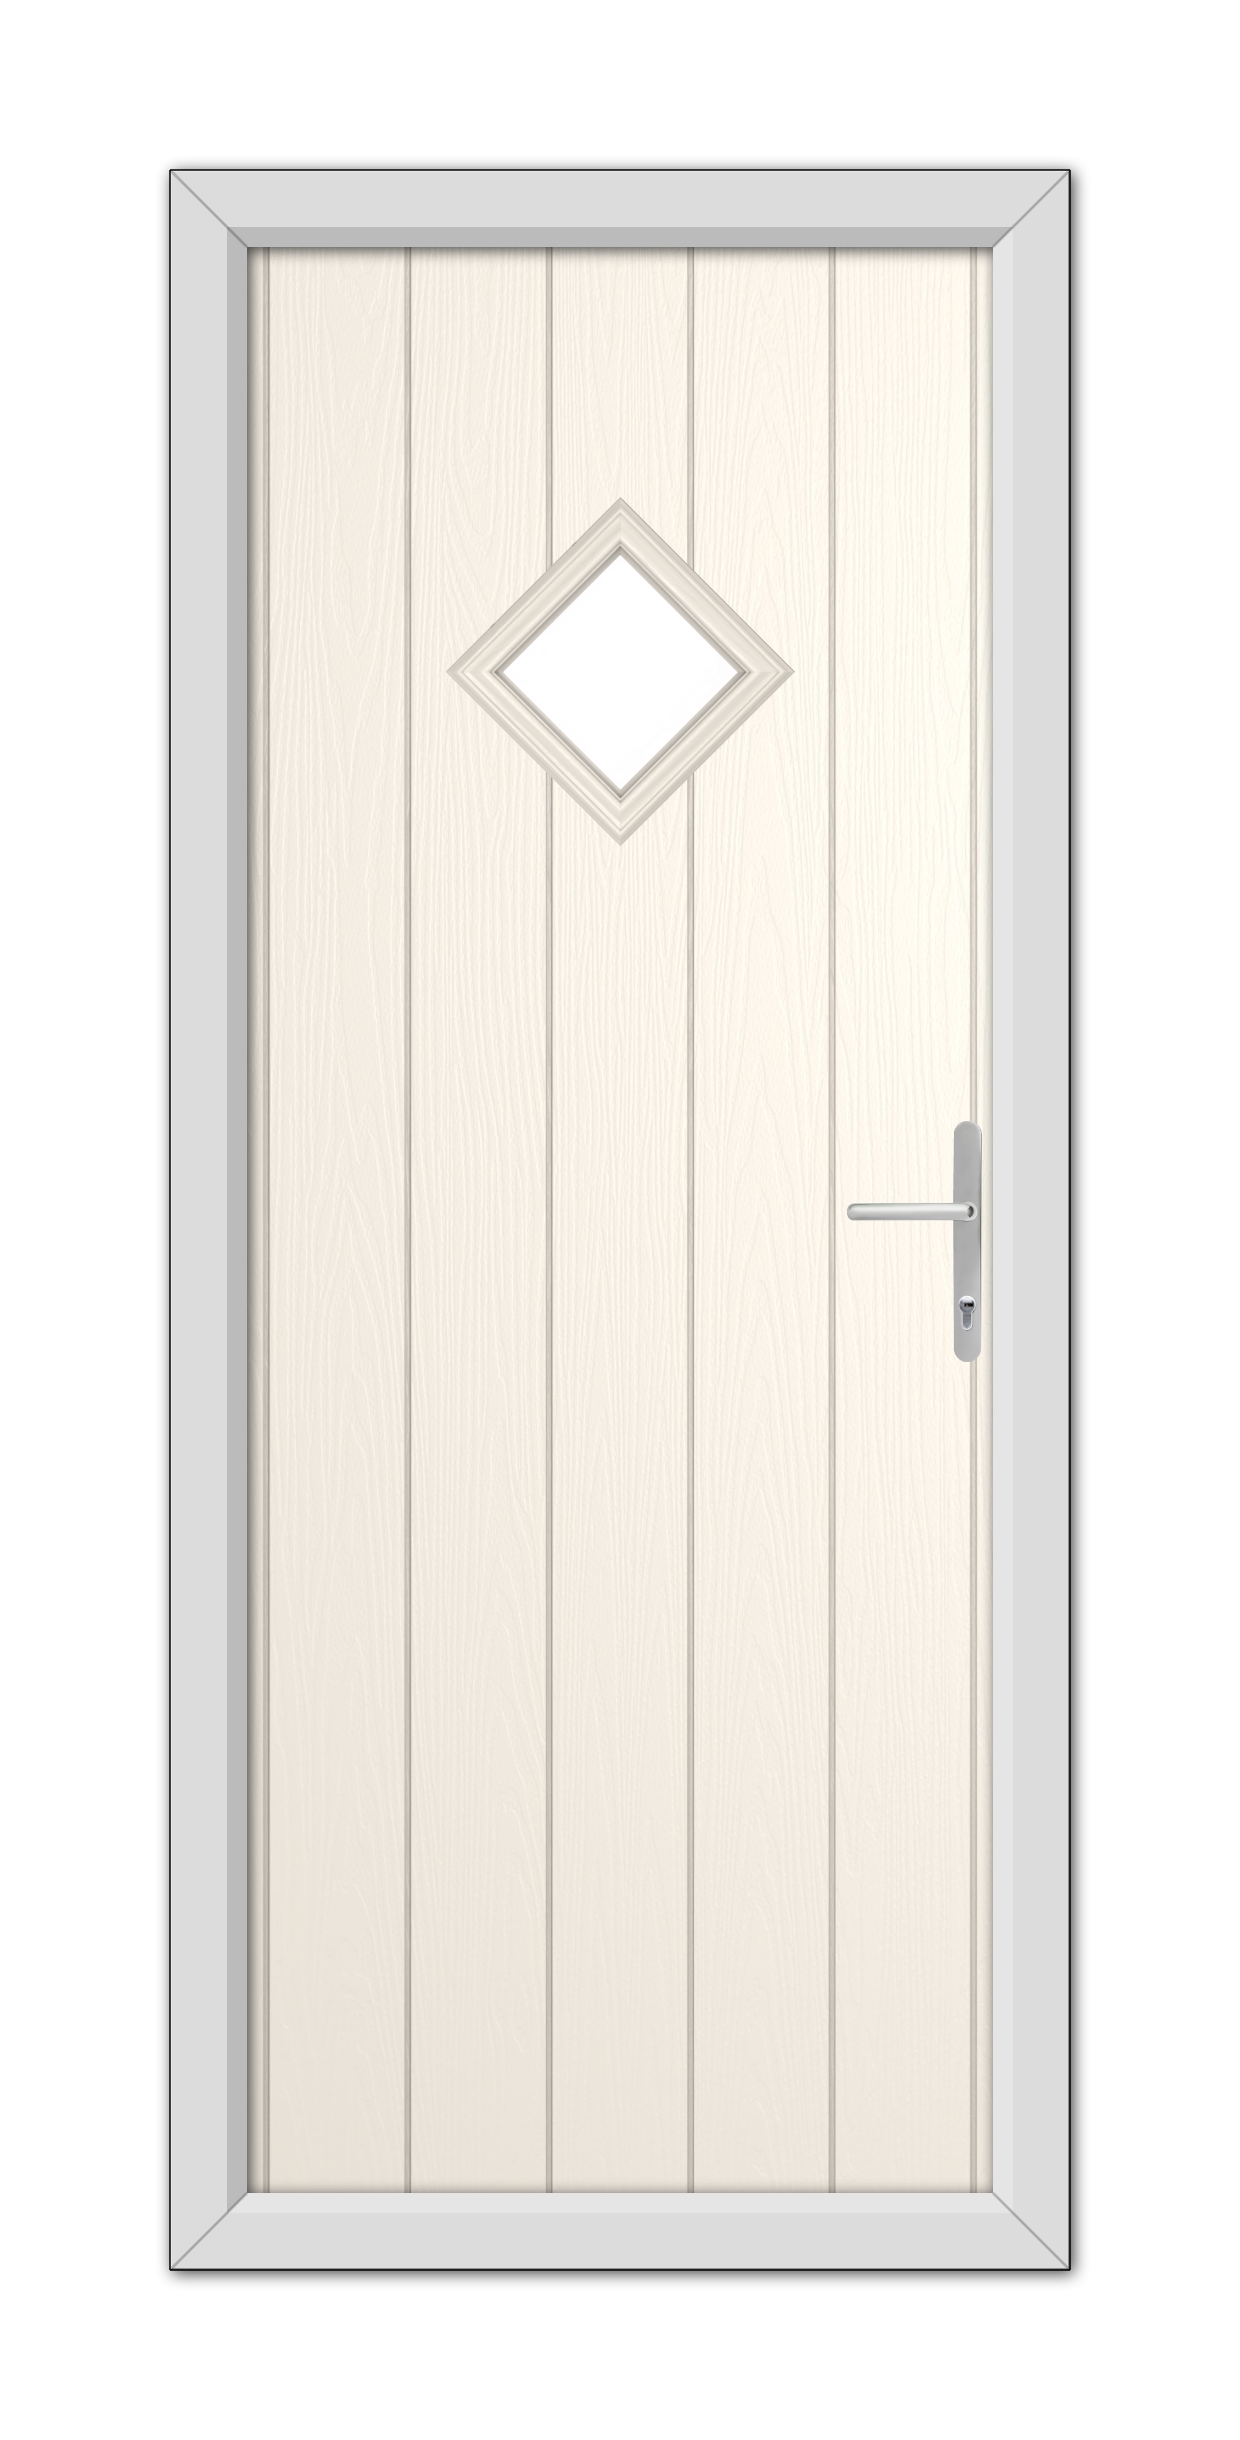 A White Foil Cornwall Composite Door 48mm Timber Core with a diamond-shaped window and metal handle, set within a gray frame.